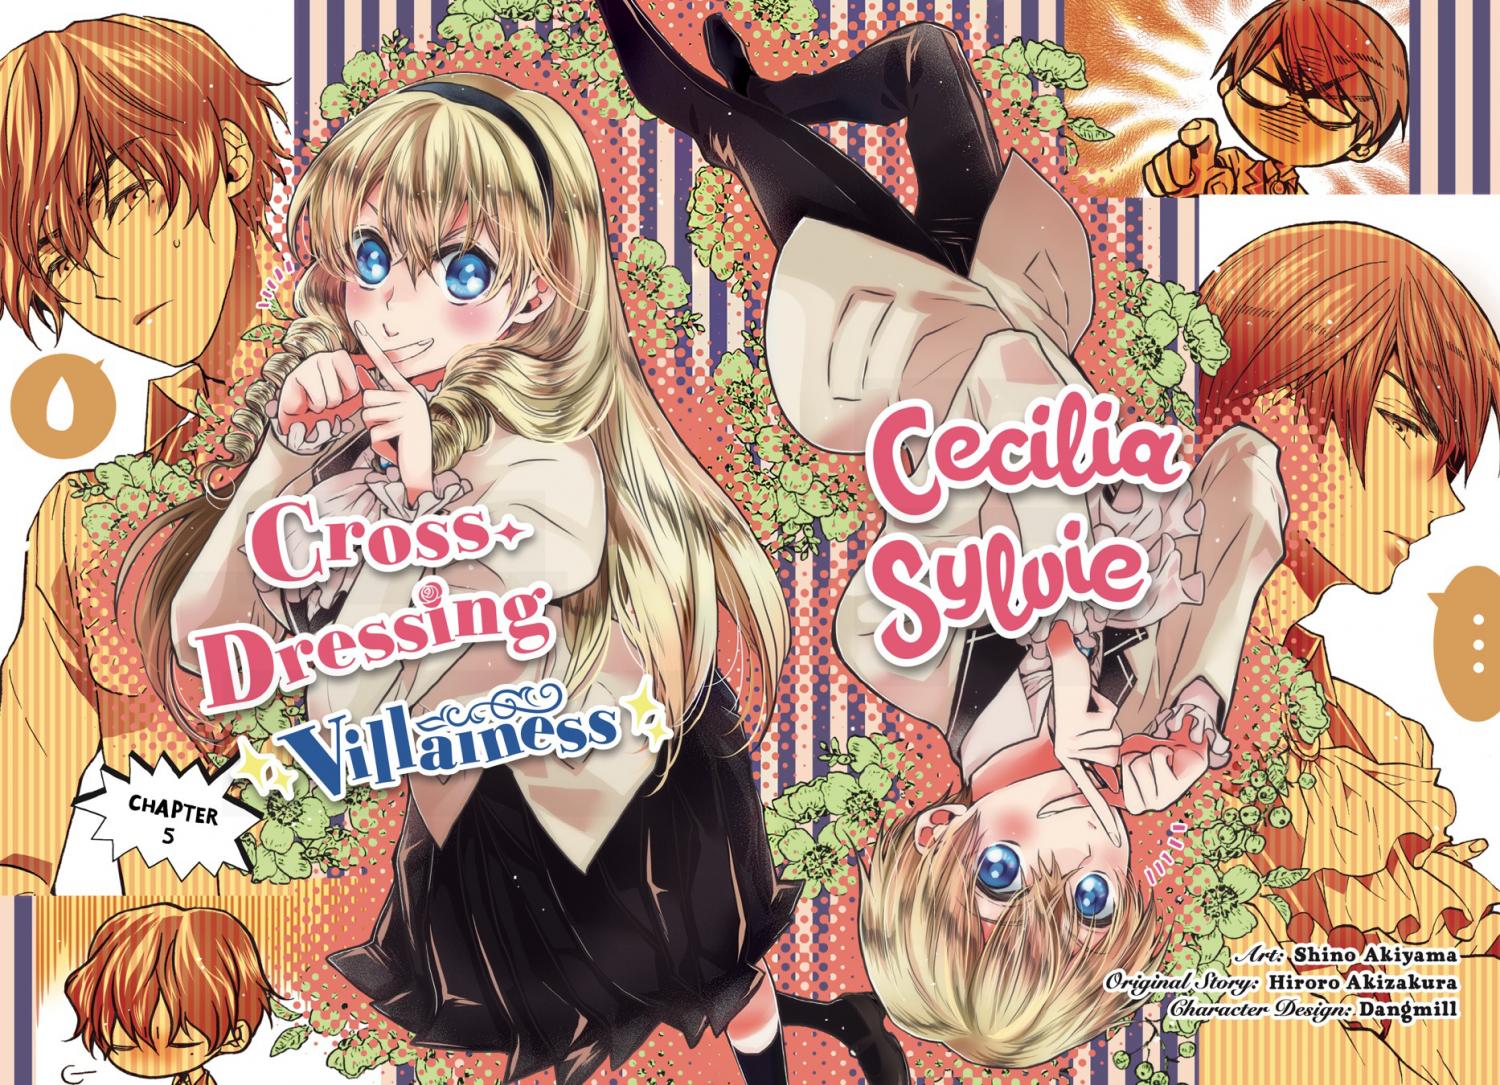 The Villainess, Cecilia Silvie, Doesn't Want To Die, So She Decided To Cross-Dress! Chapter 5 #4